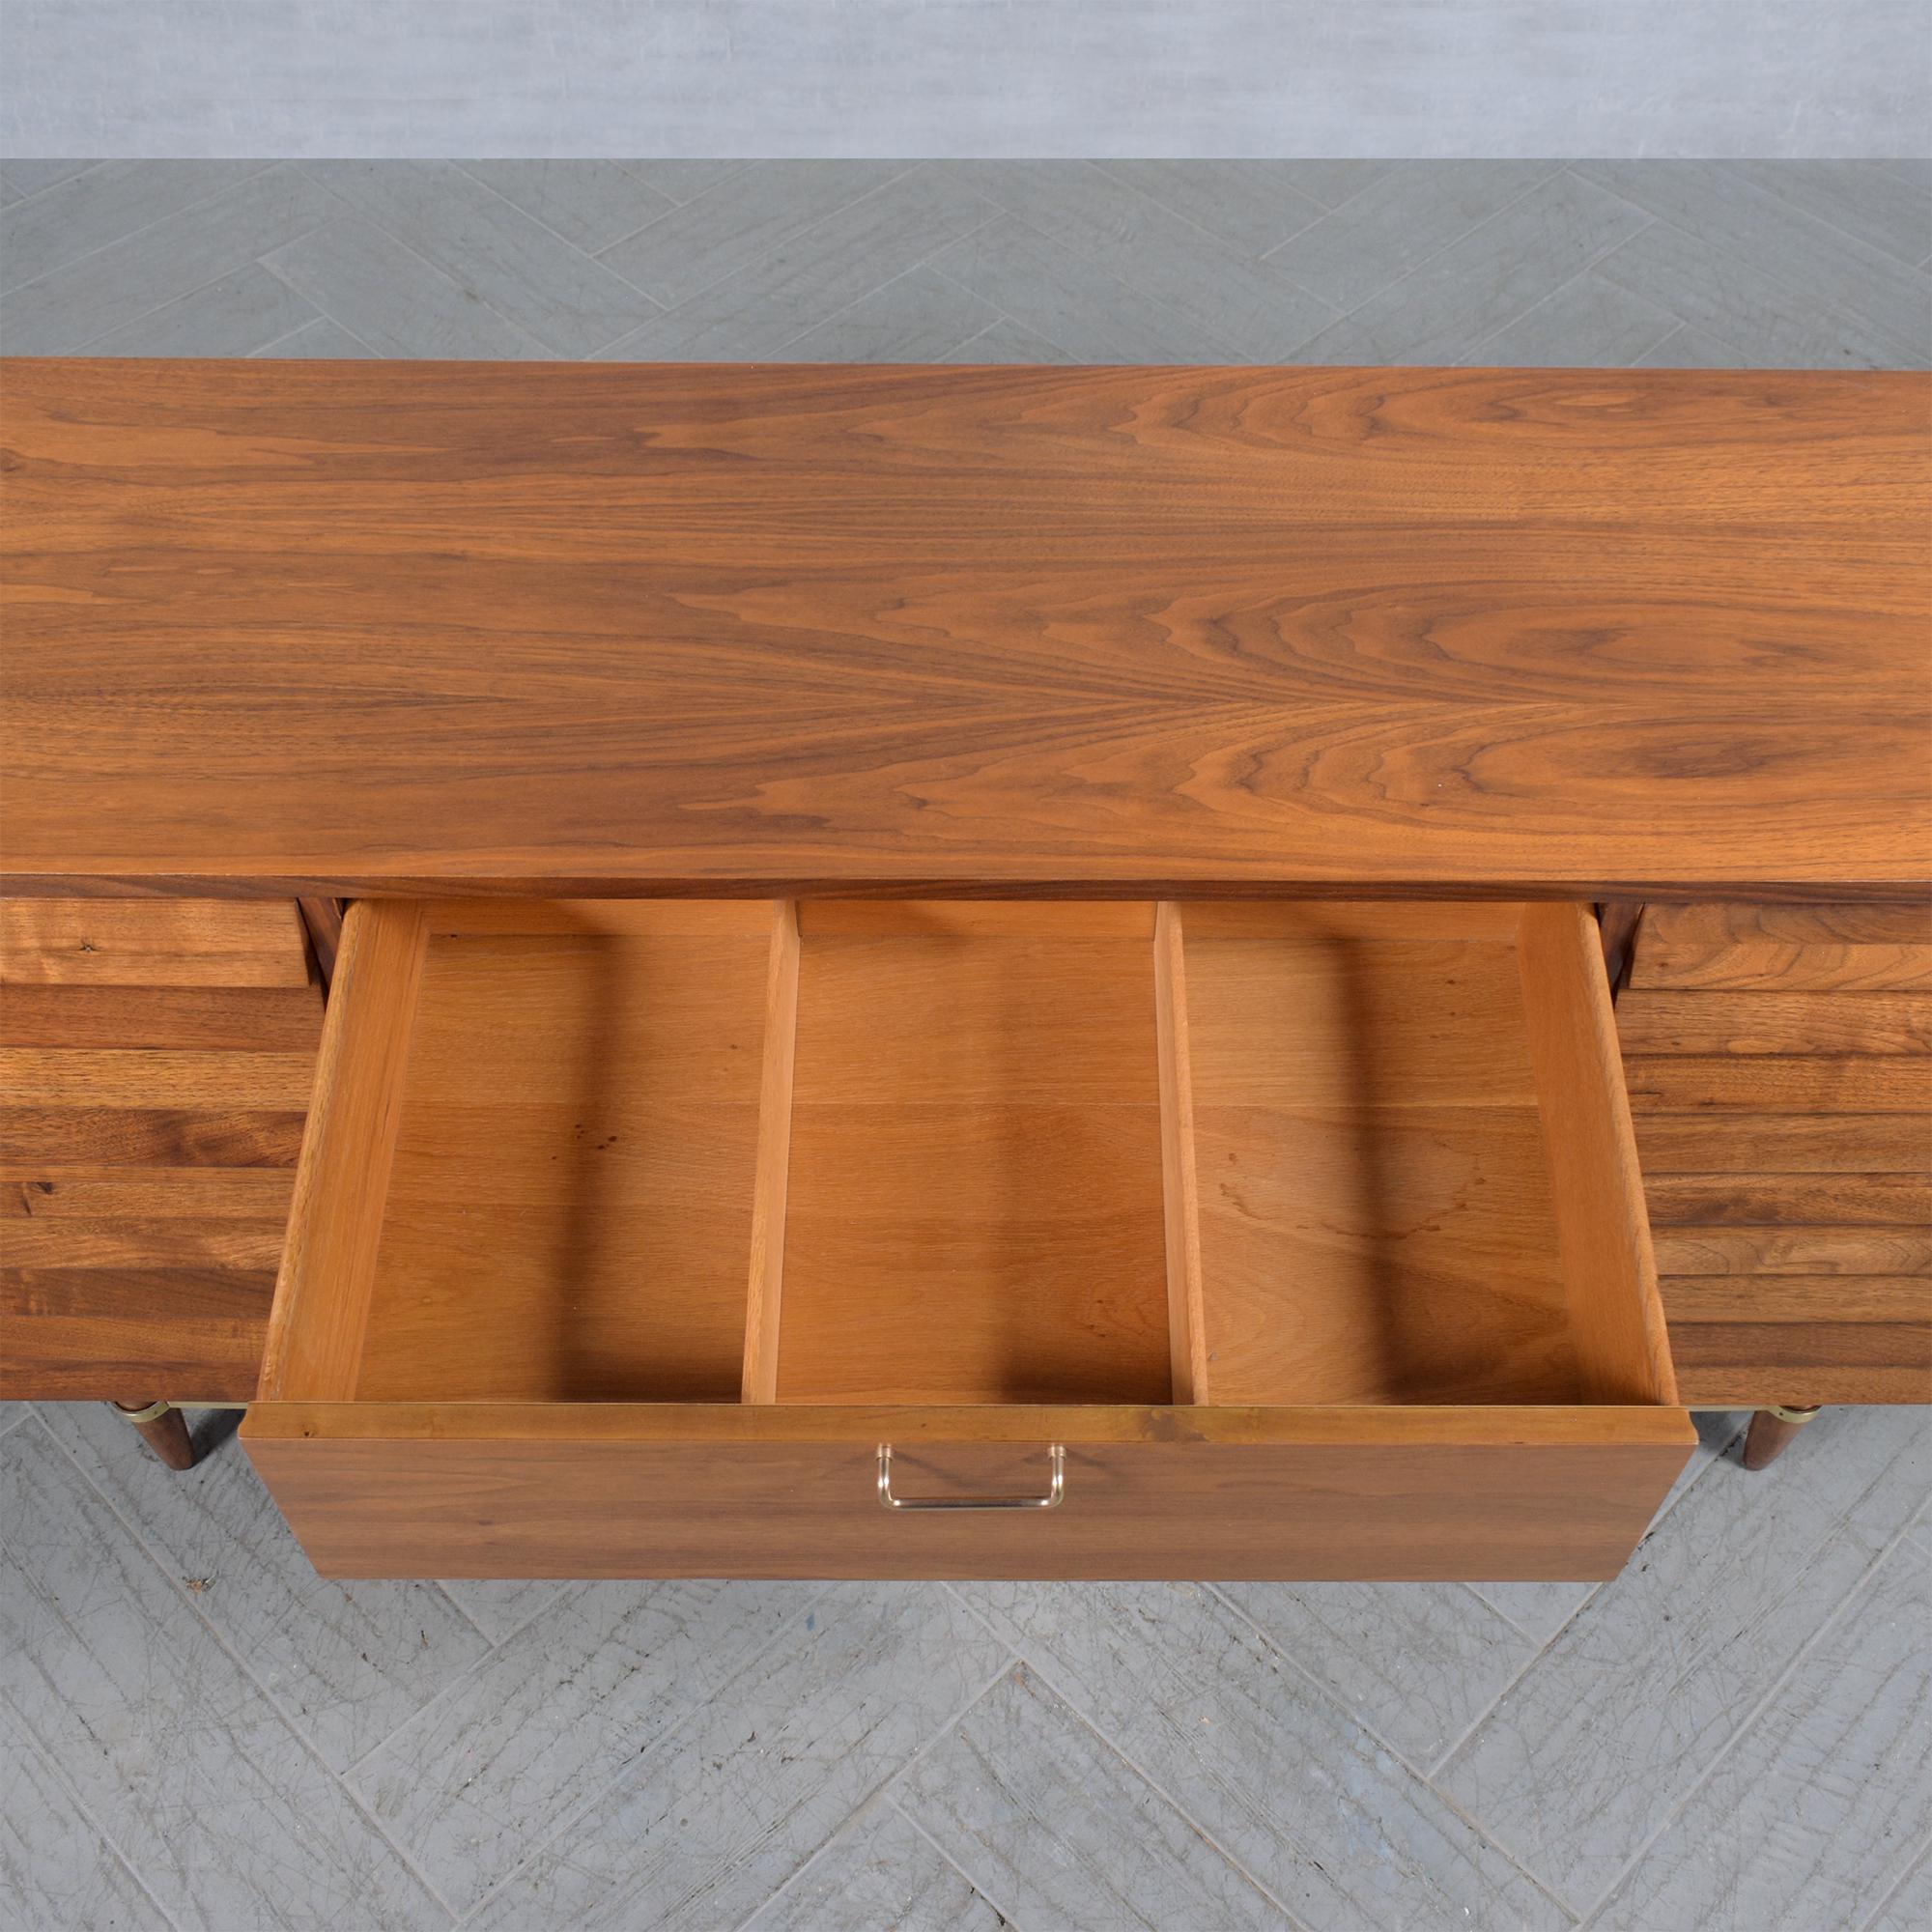 Restored Mid-Century Modern Walnut Dresser: Timeless Elegance & Function In Good Condition For Sale In Los Angeles, CA